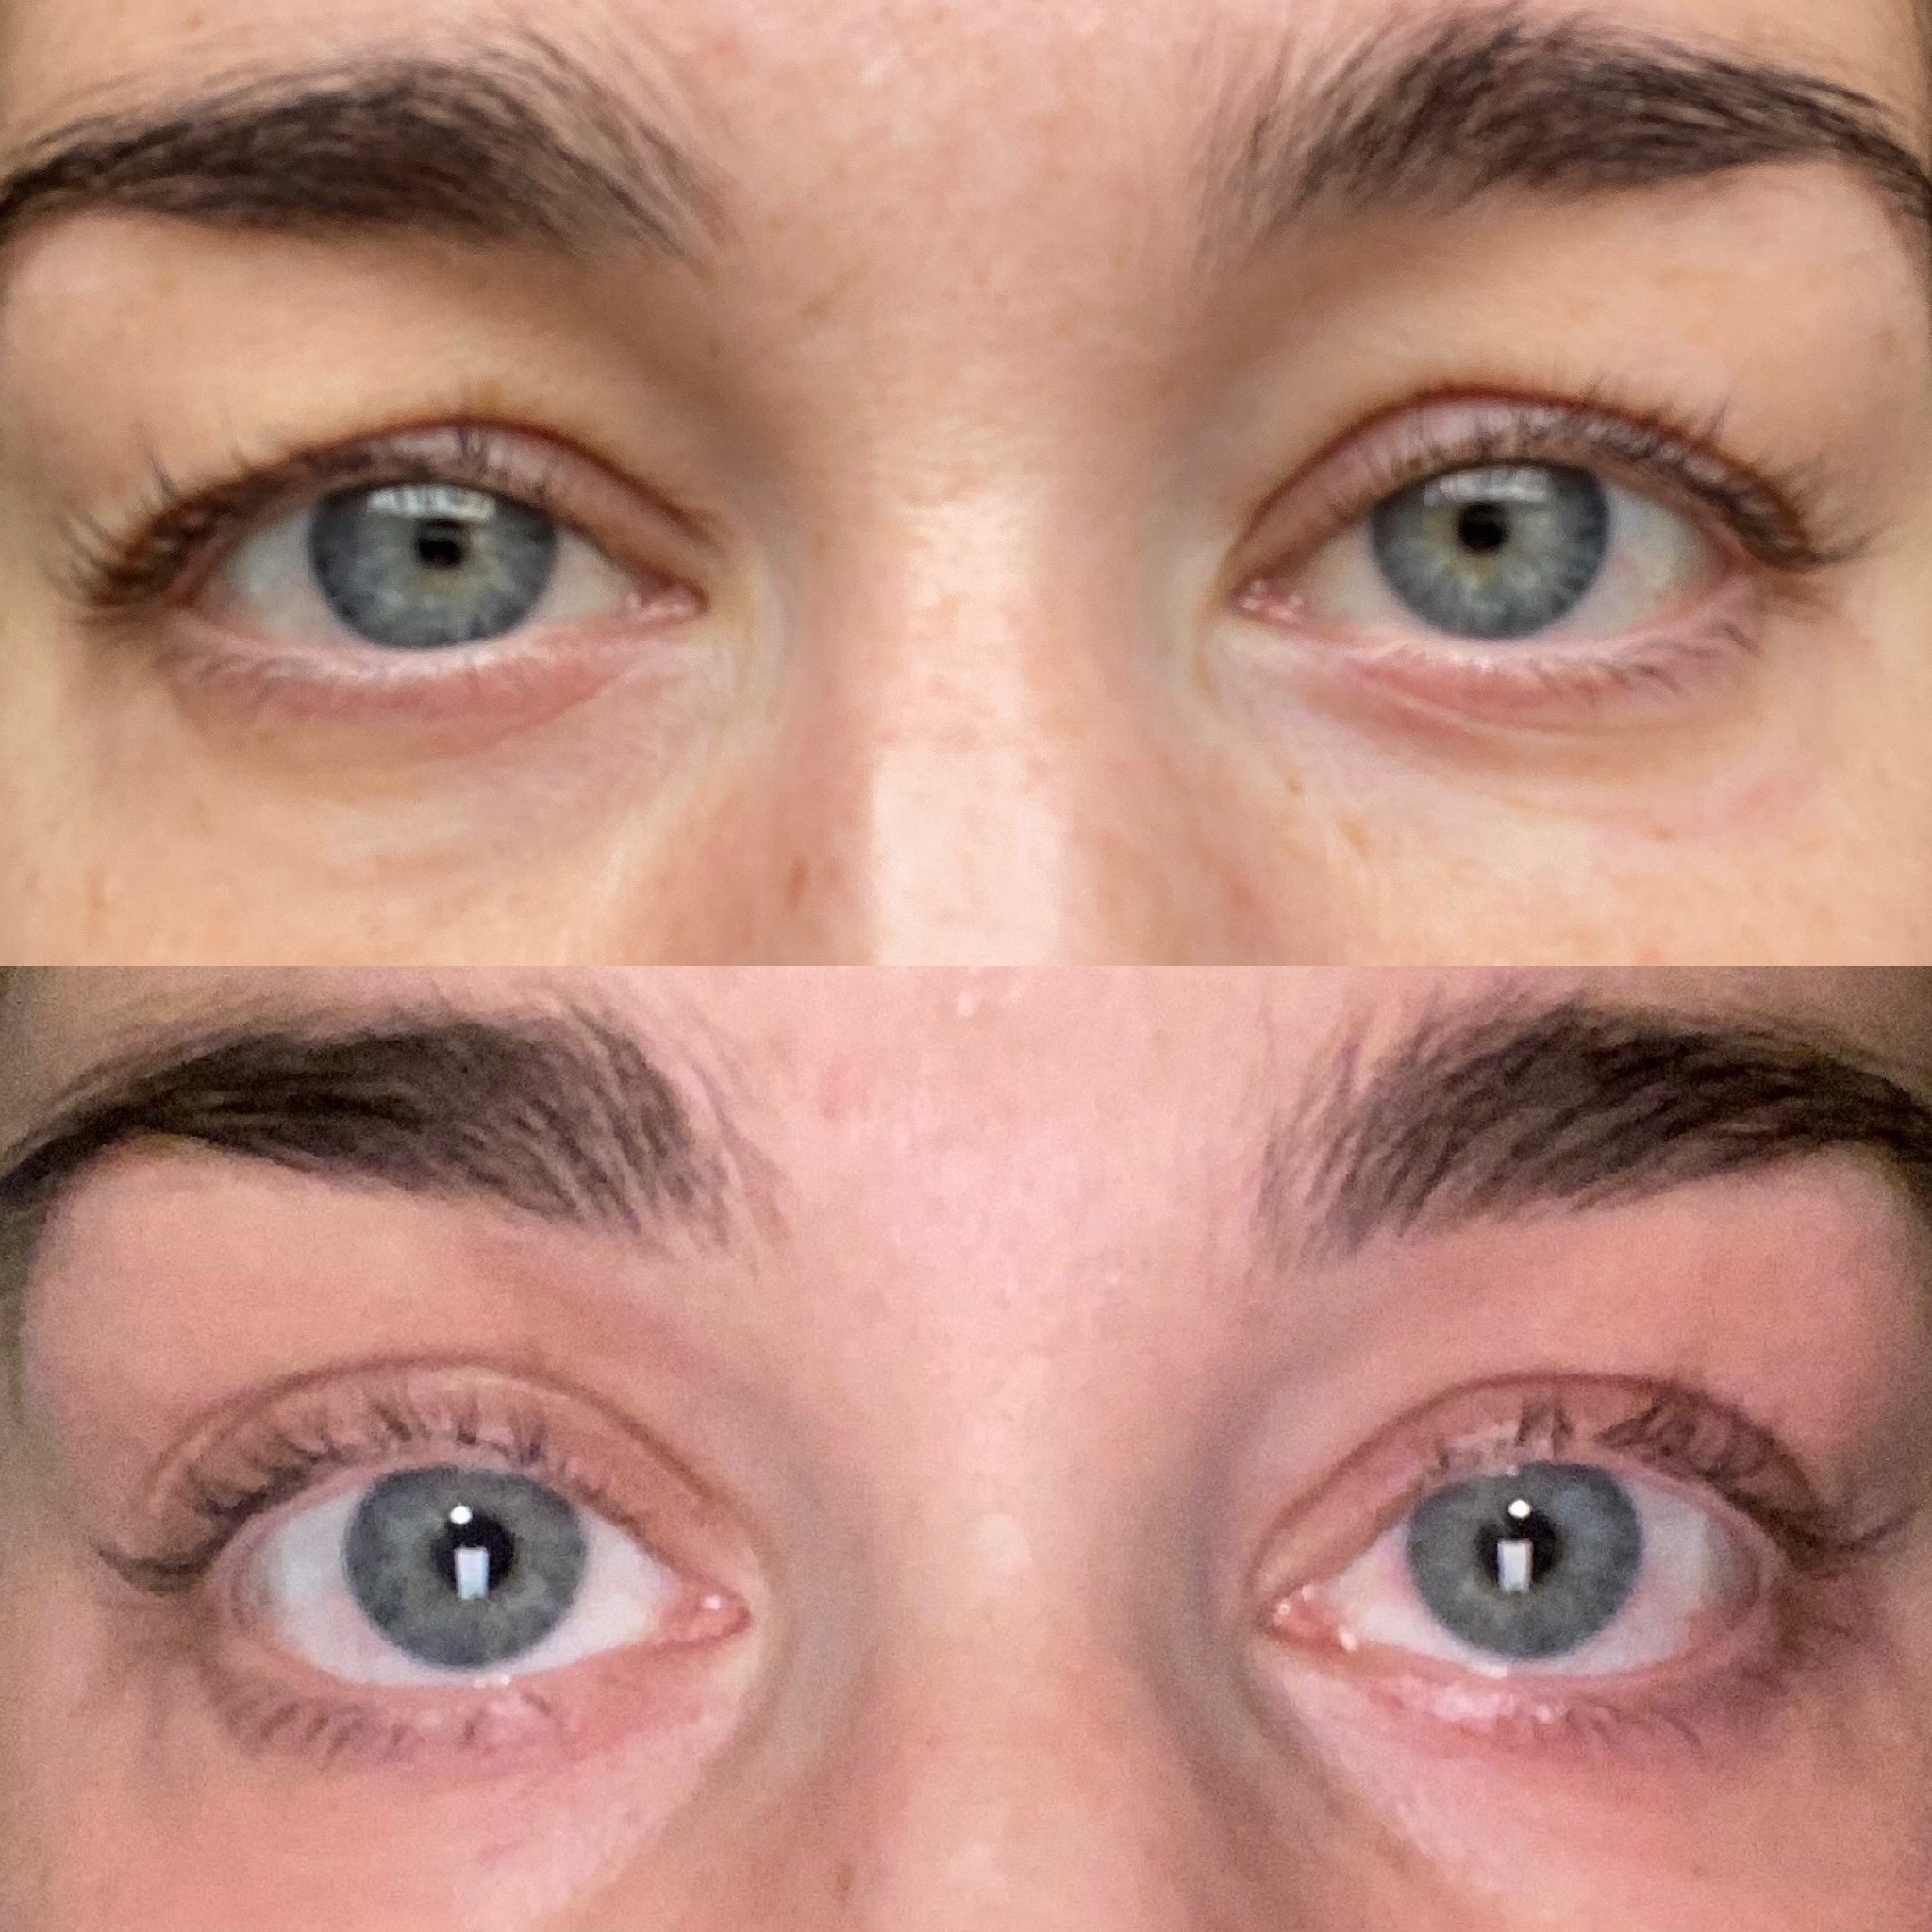 Verso Super Eye Serum Before and After